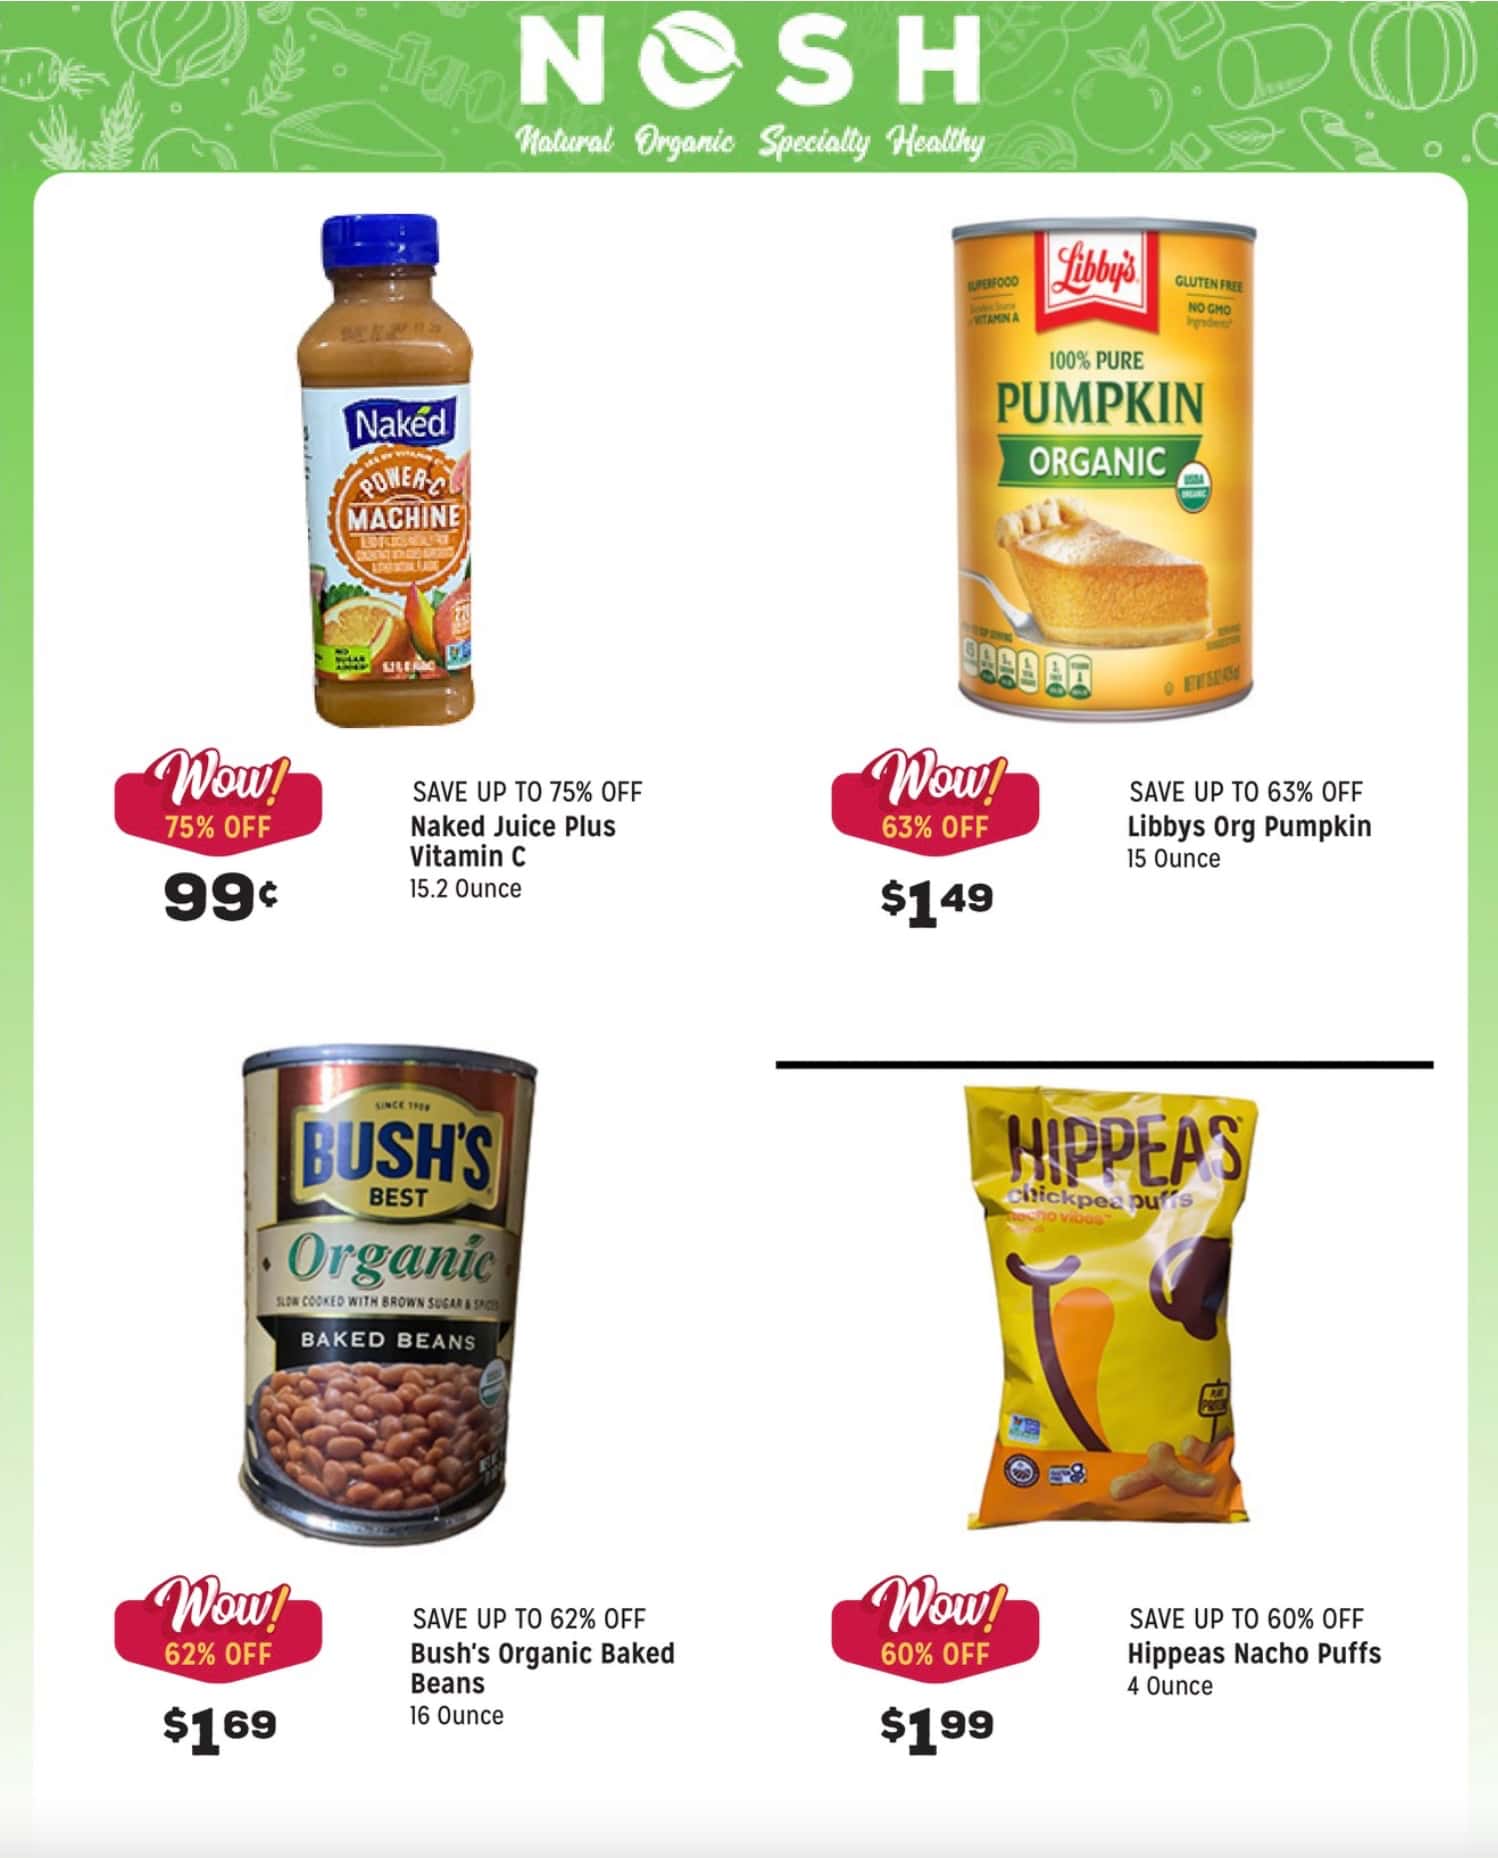 GroceryOutlet_weekly_ad_041724_05